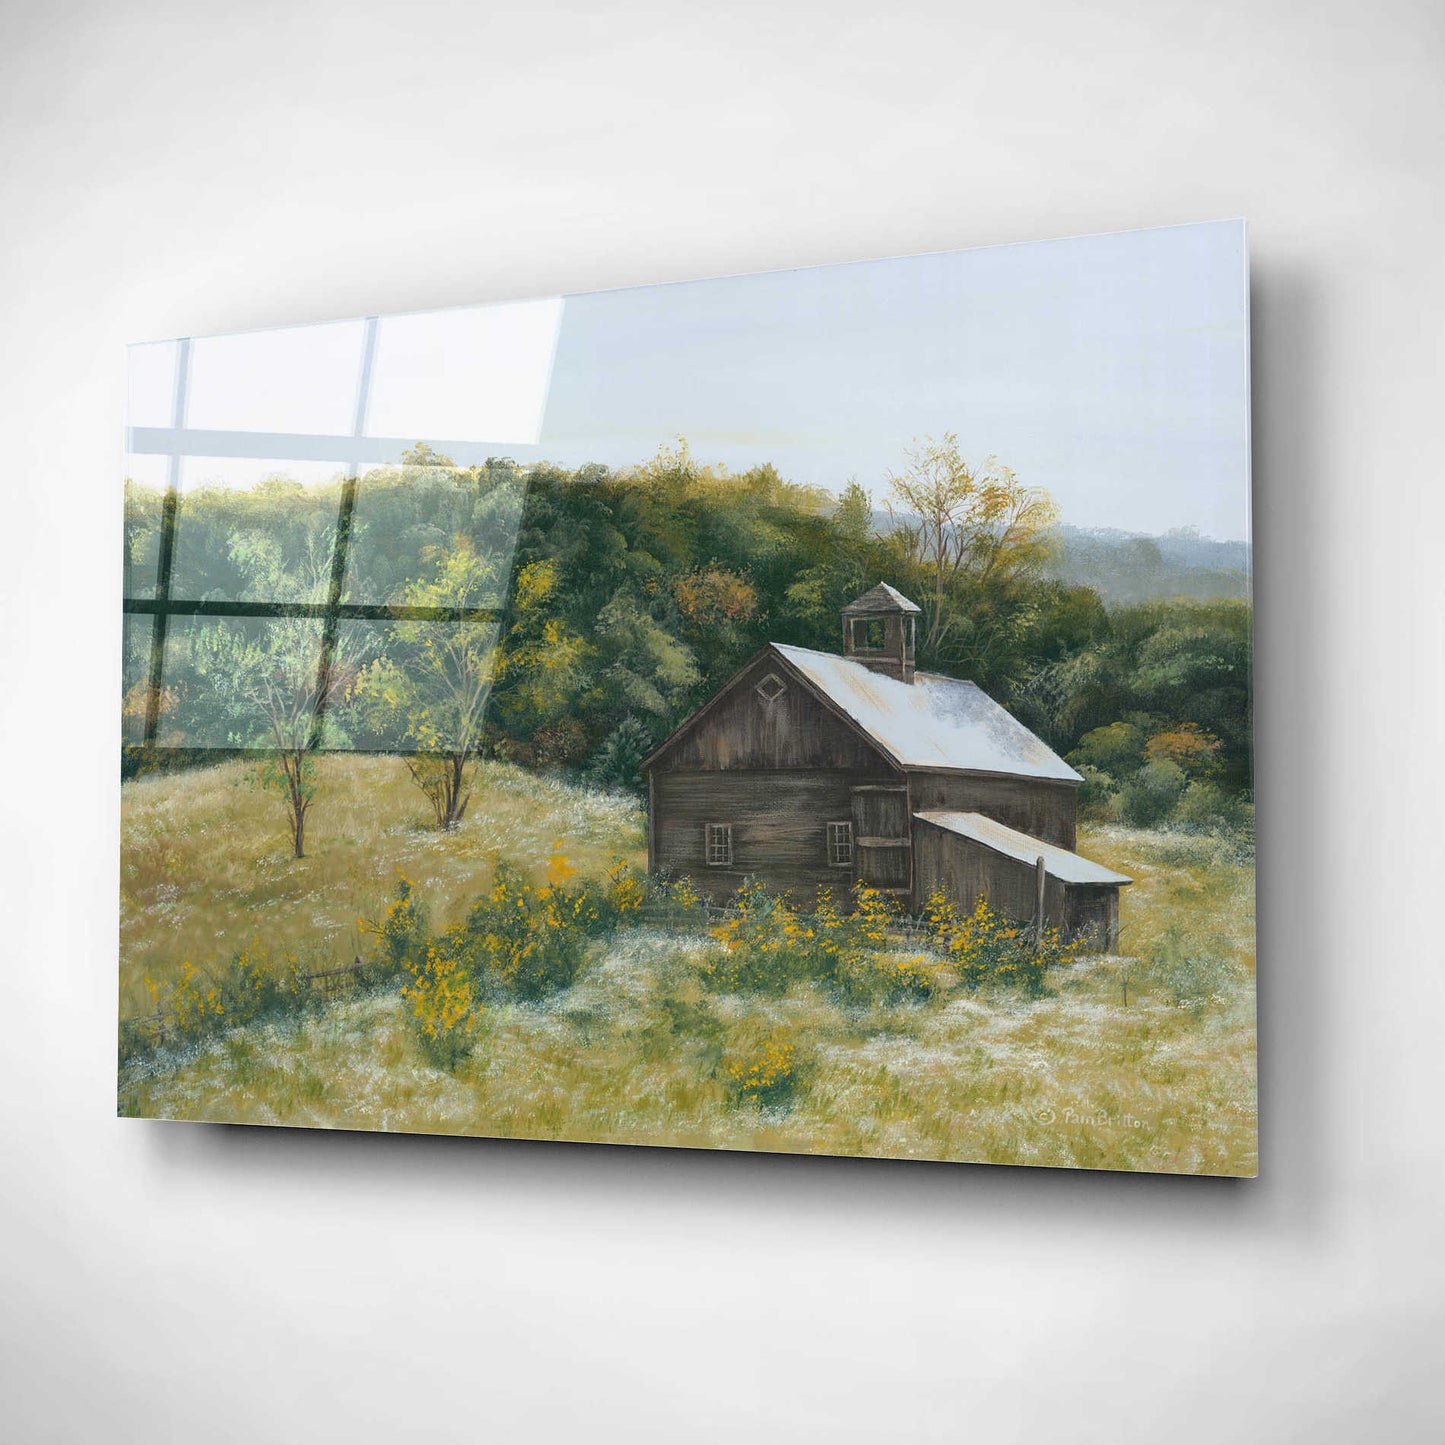 Epic Art 'Barn in Vermont' by Pam Britton, Acrylic Glass Wall Art,16x12